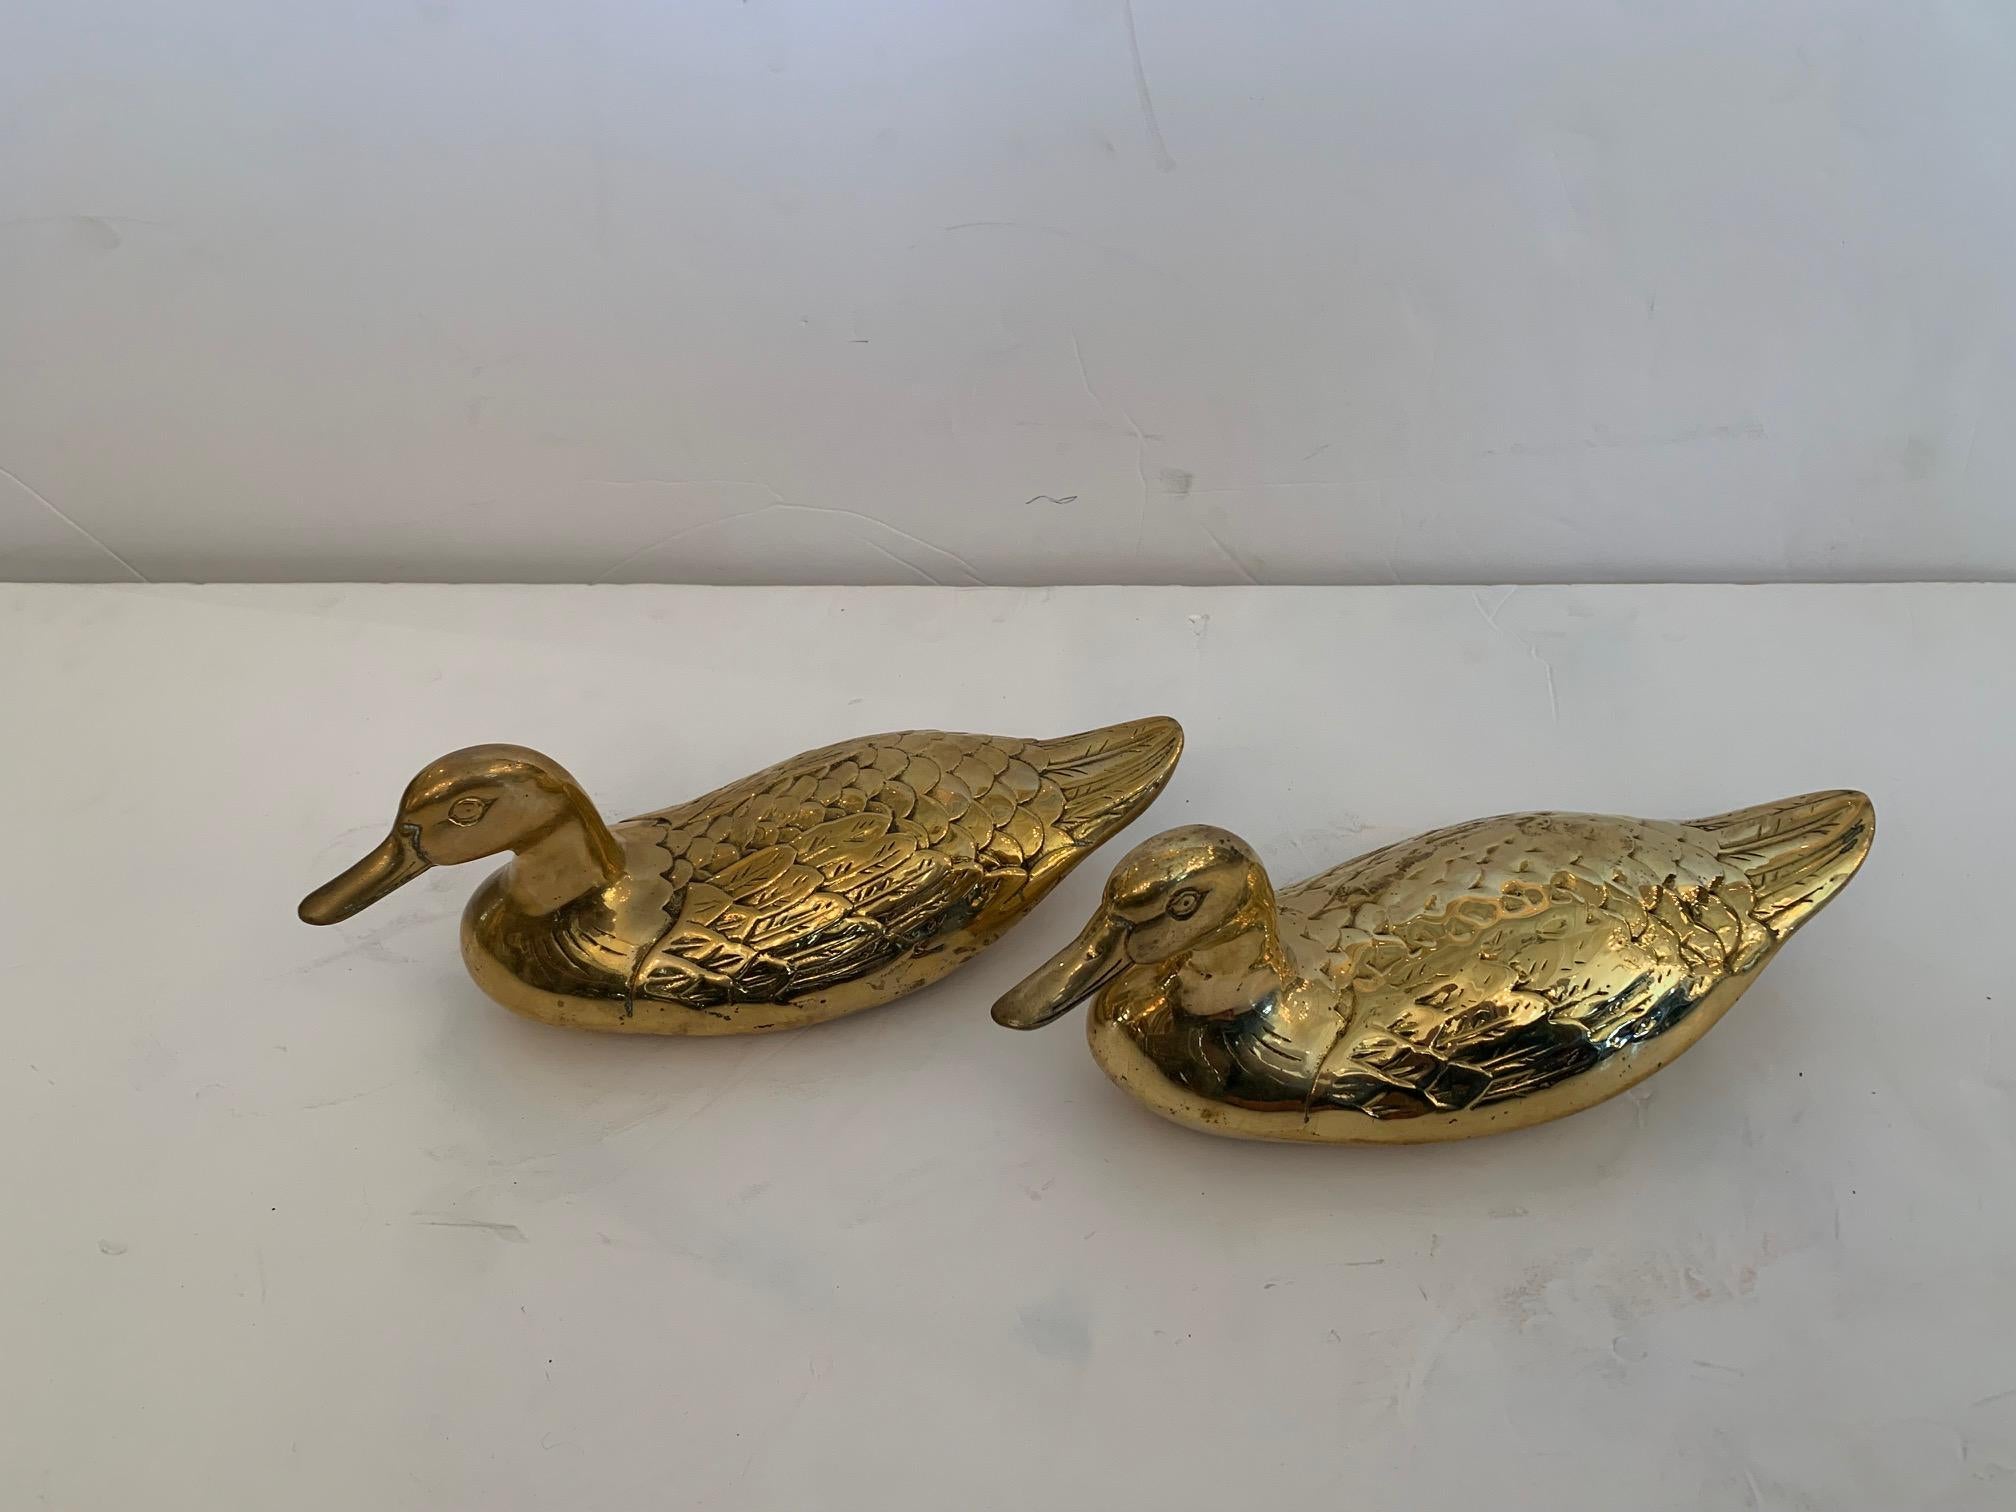 Charming decorative table top sculpture pair of ducks in cast brass having flat bottoms. Would look great adorning bookshelves or anywhere character rich accessories would add visual interest.